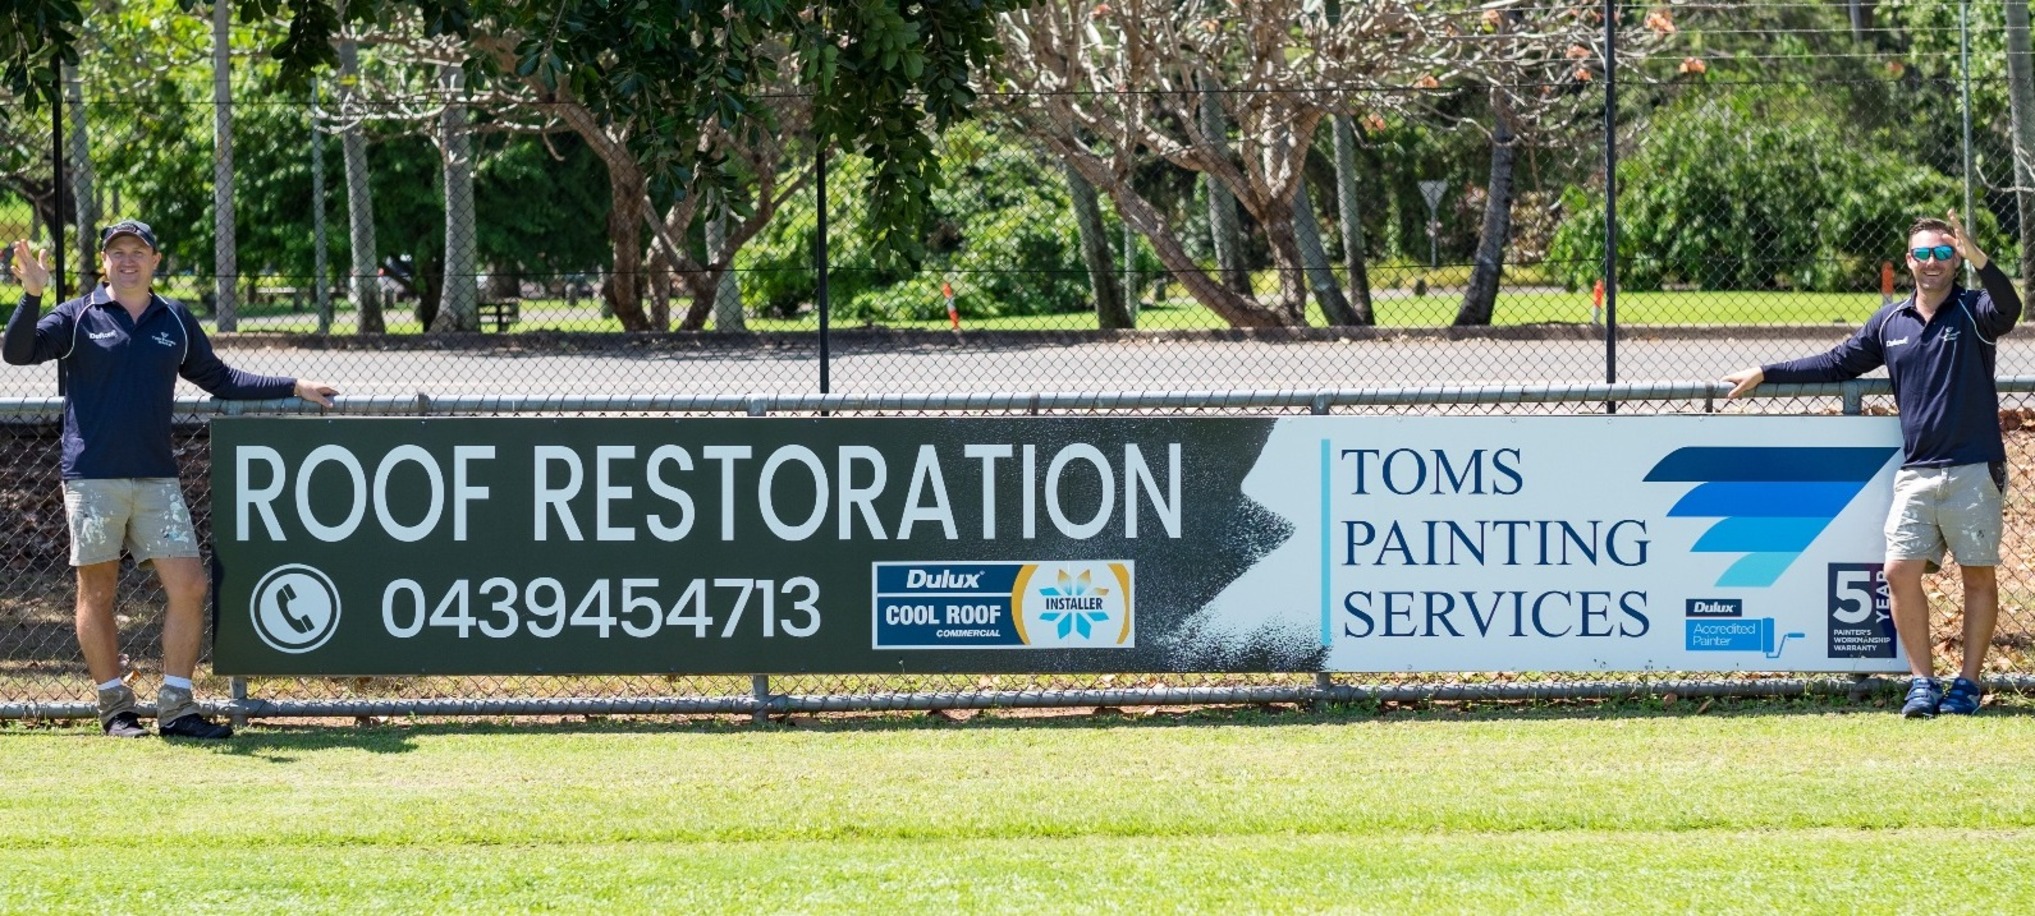 roof-restoration-service-toms-painting-service-darwin-nt (2)